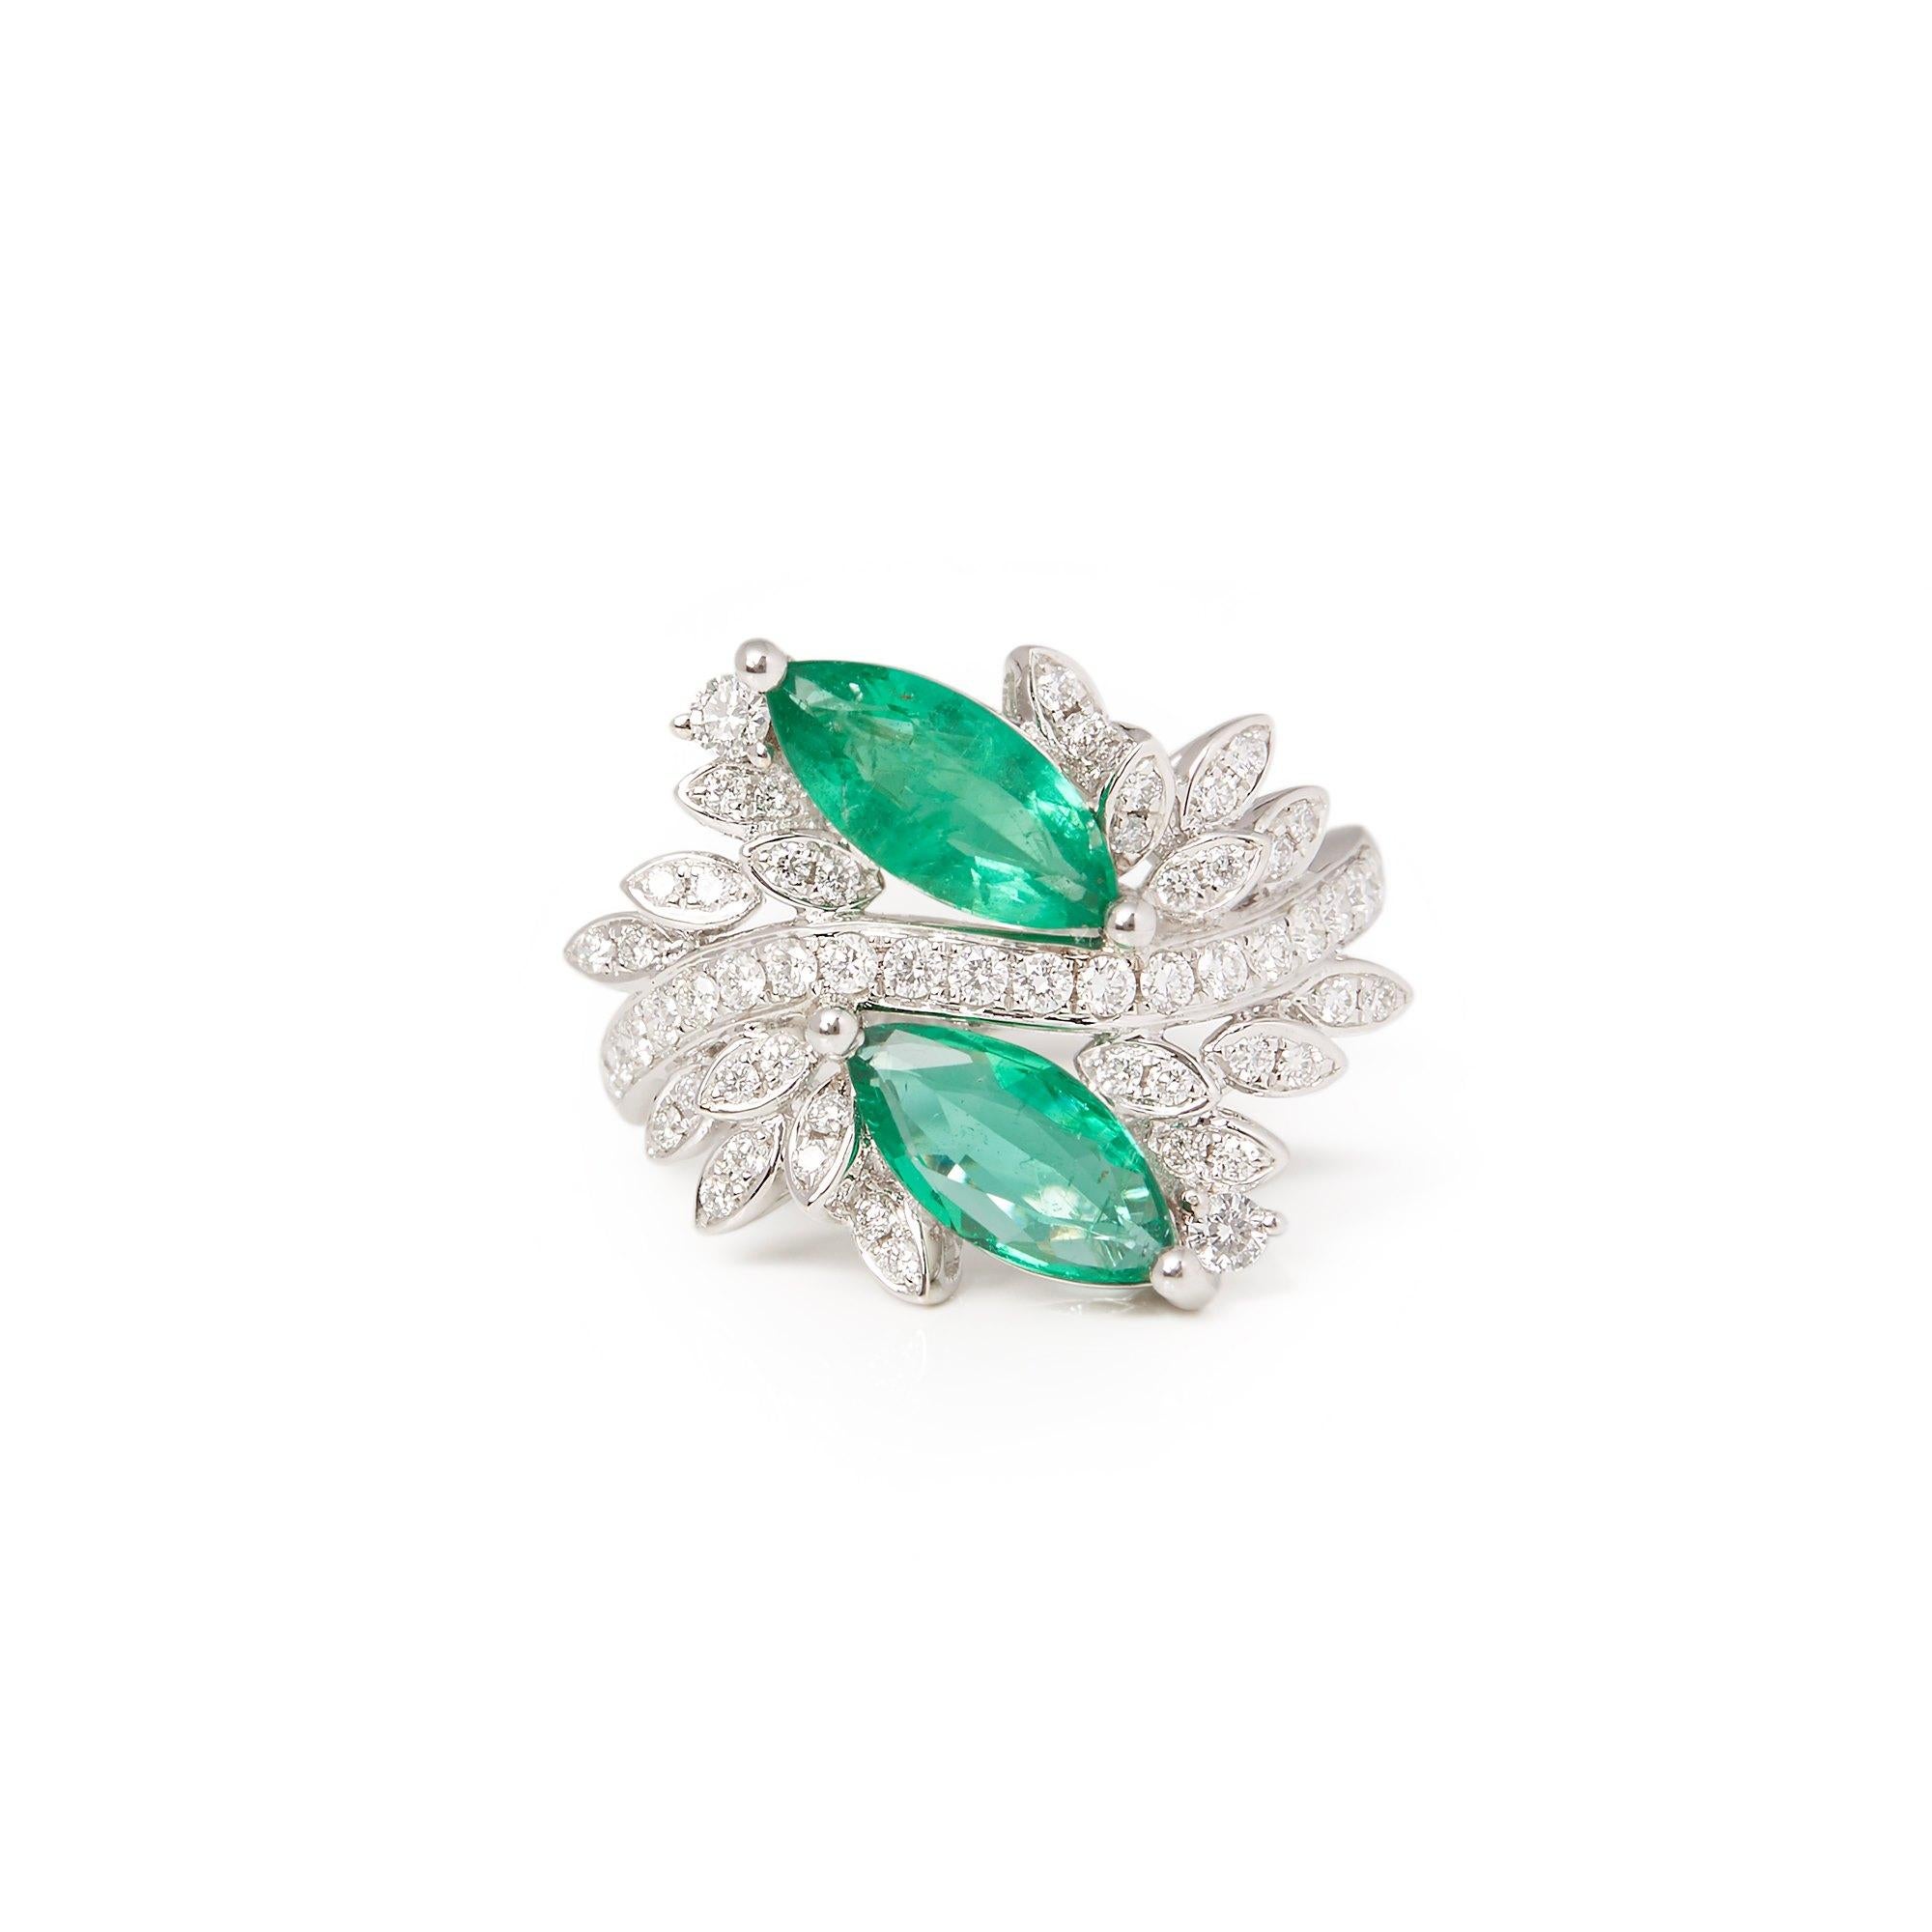 This ring designed by David Jerome is from his private collection and features two marquise cut Emeralds totalling 1.73cts sourced in Zambia set with round brilliant cut Diamonds totalling 0.57cts mounted in an 18k white gold setting. Finger size UK